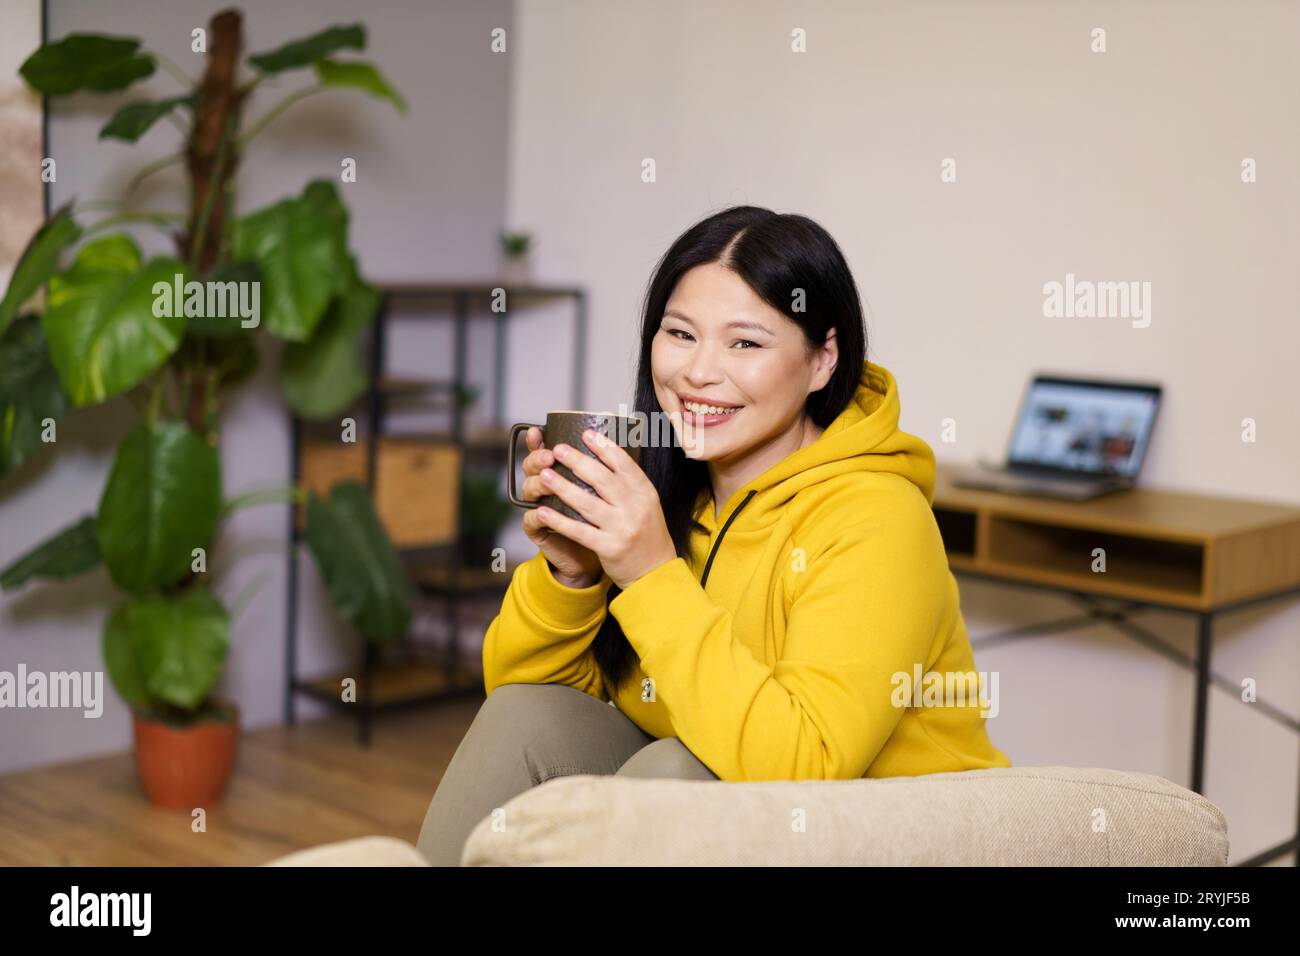 Cute Asian woman takes break from her online work at home to enjoy a soothing cup of tea. The image captures the balance of work Stock Photo